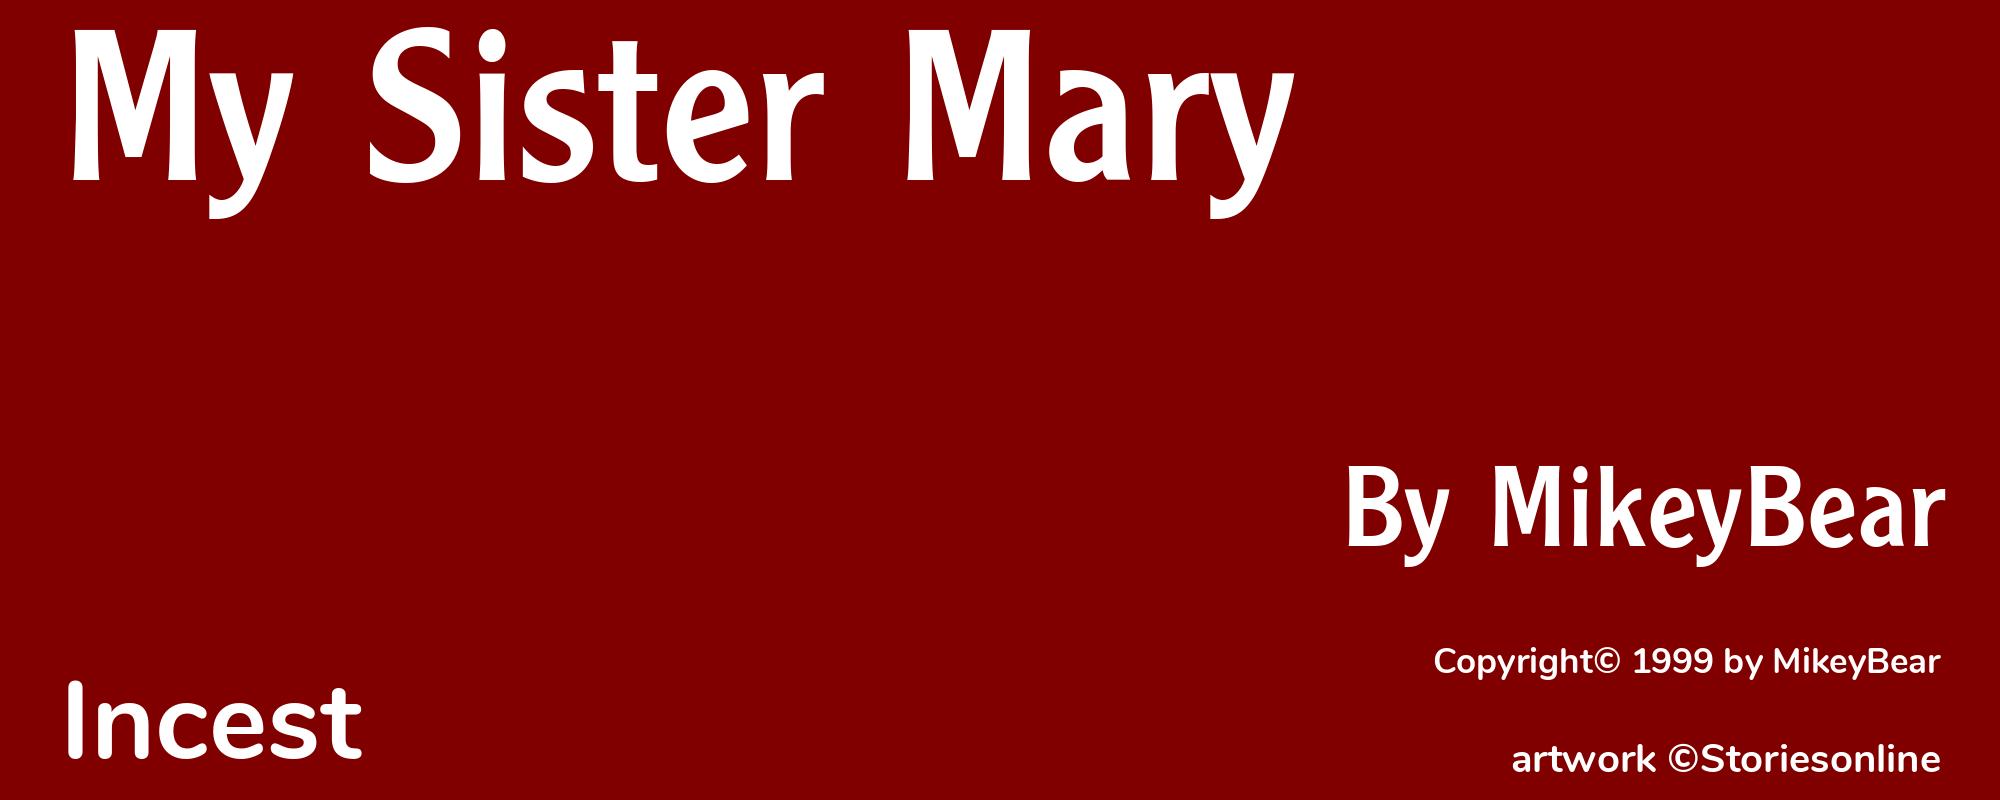 My Sister Mary - Cover